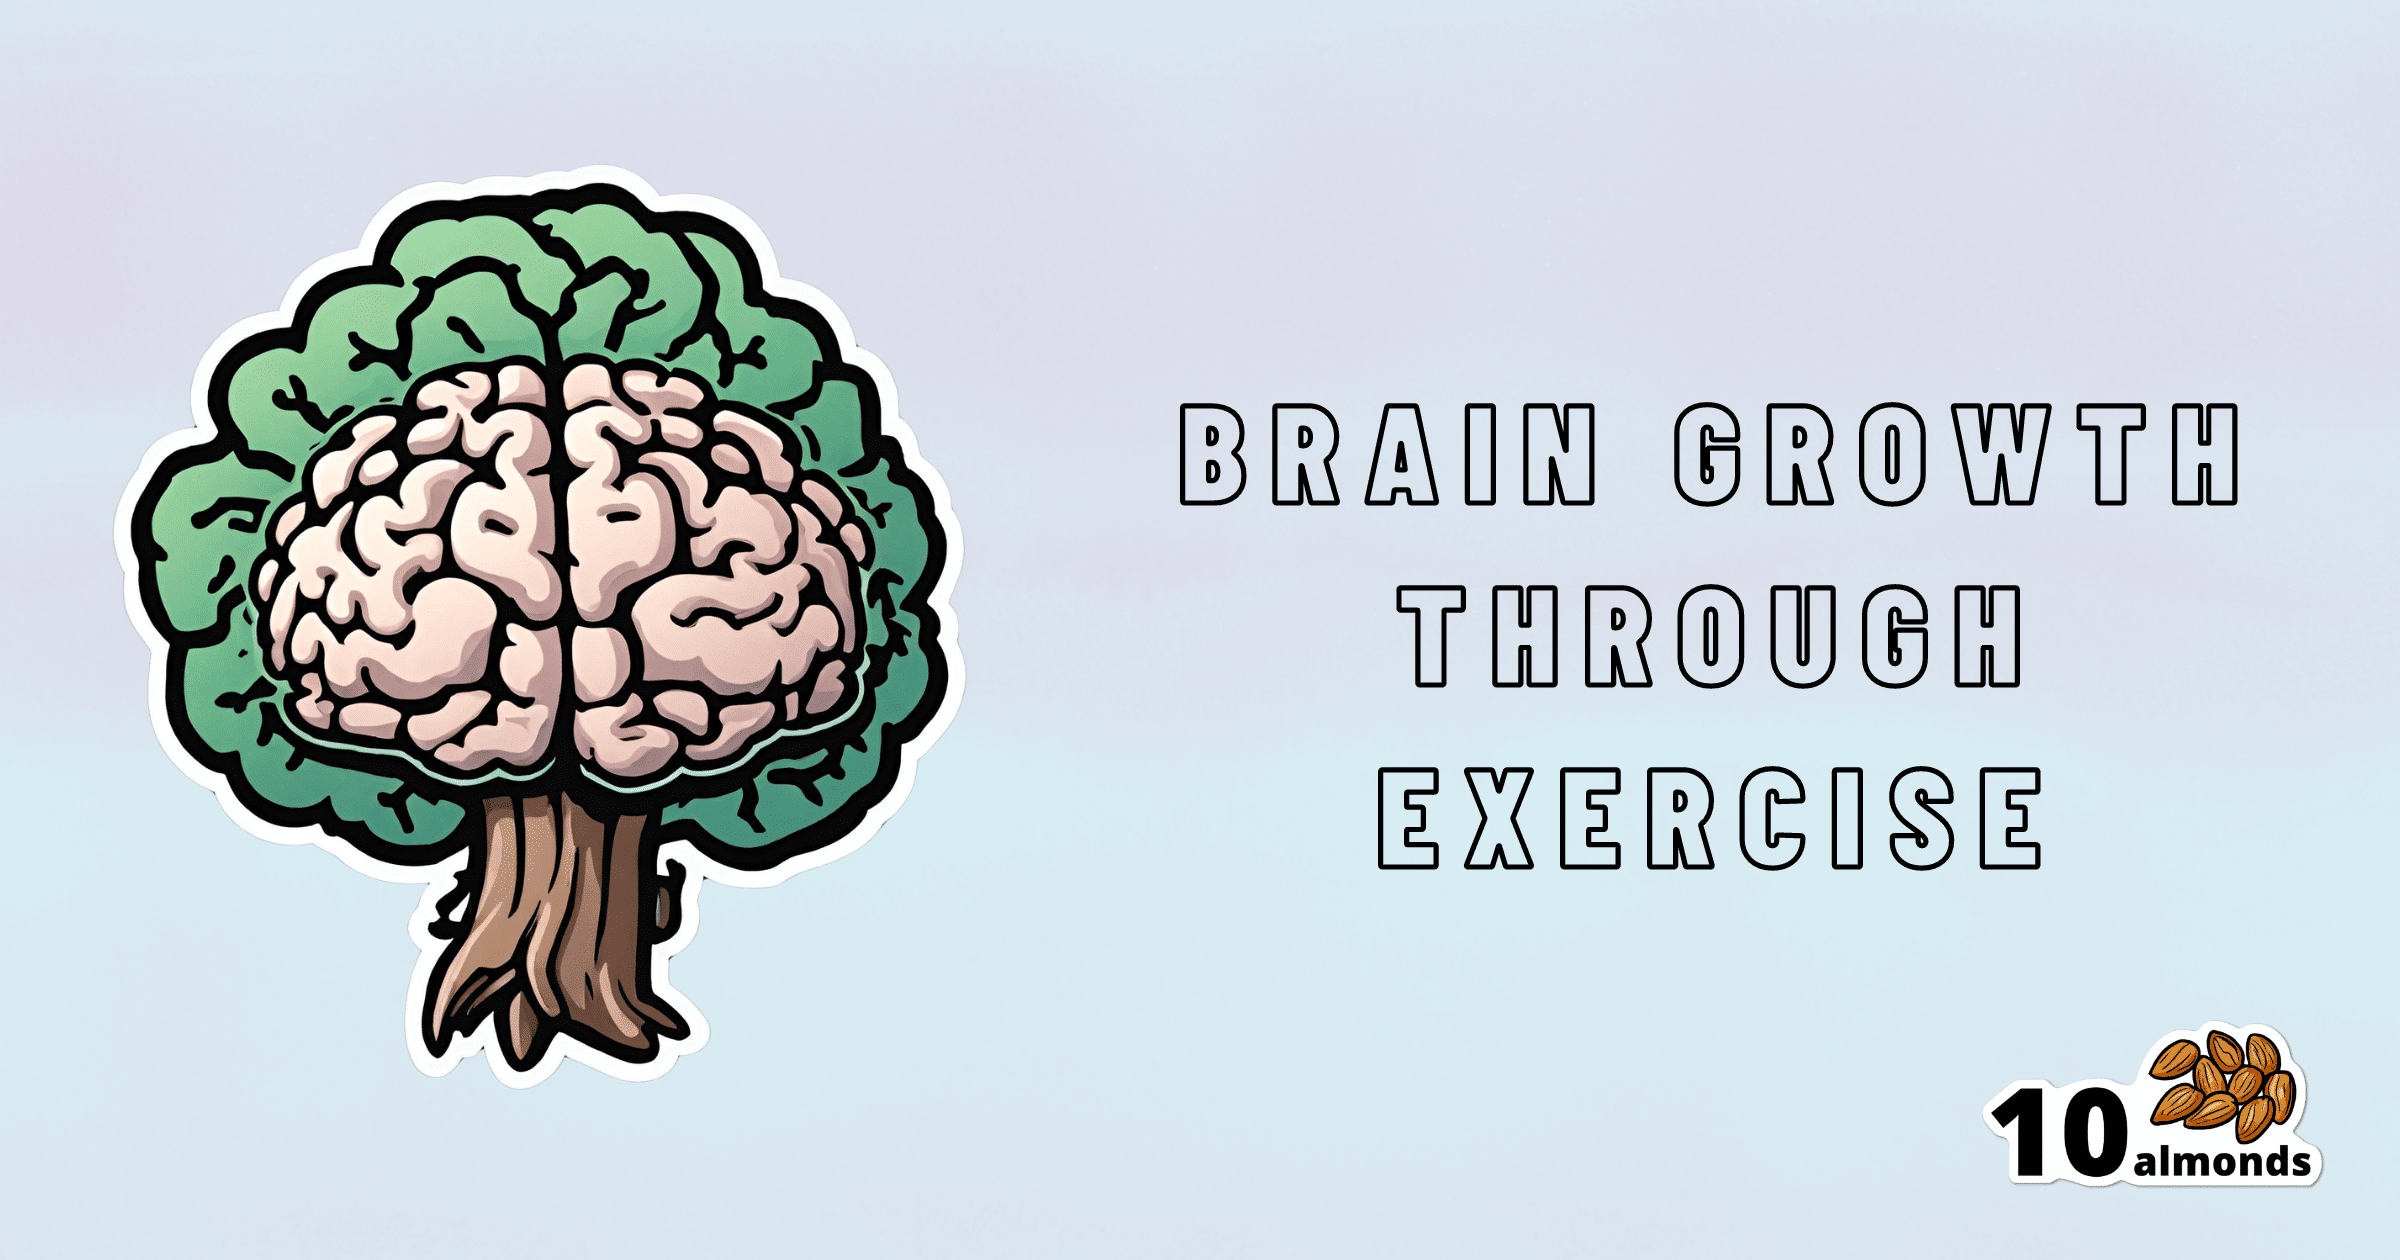 Brain growth can be achieved through regular walking exercise over a period of 3 months, resulting in significant brain benefits.